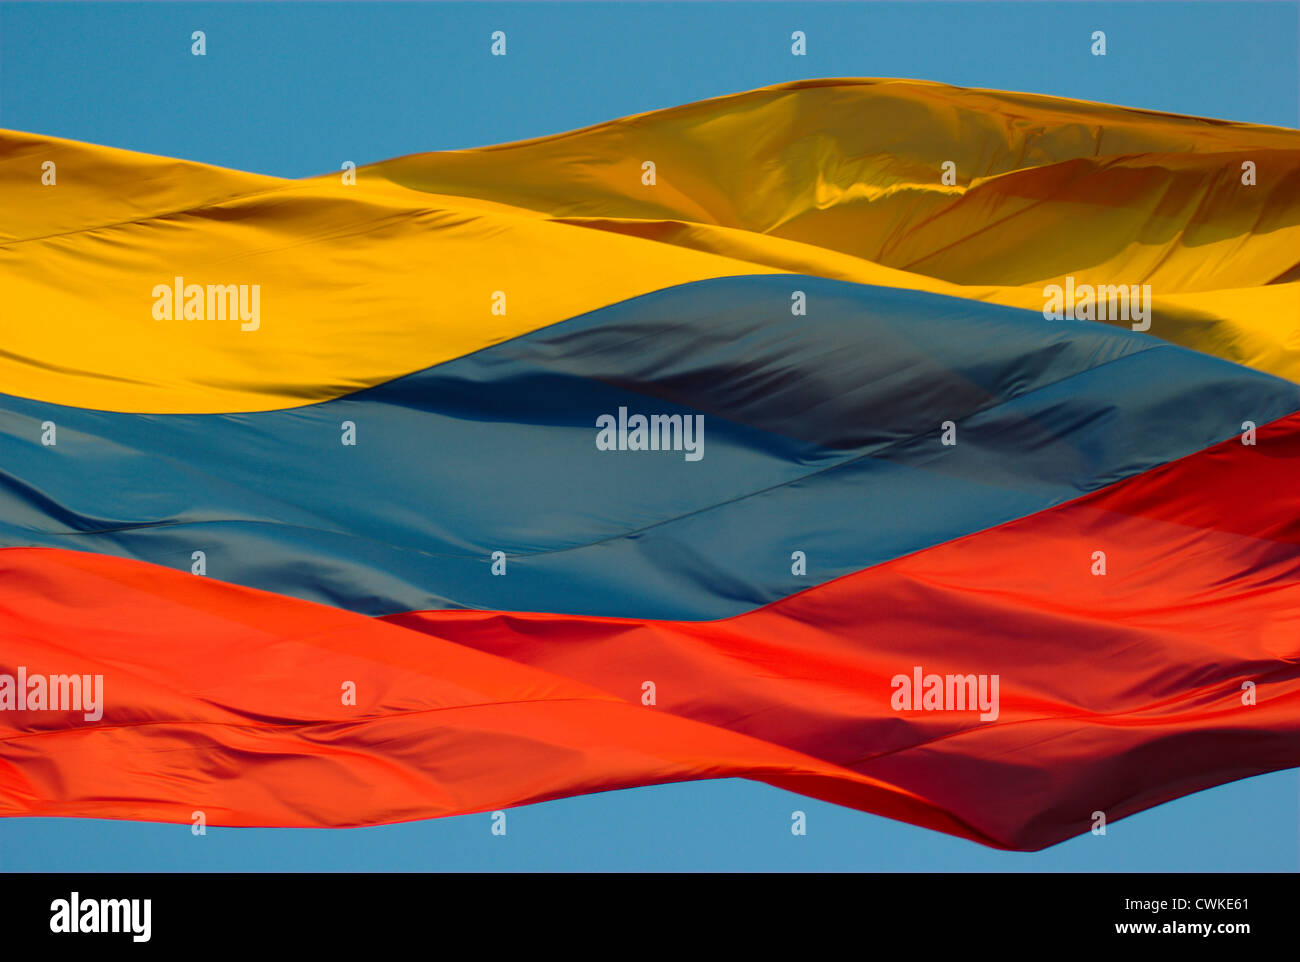 Yellow-blue-red striped Colombian flag moving in the wind Stock Photo